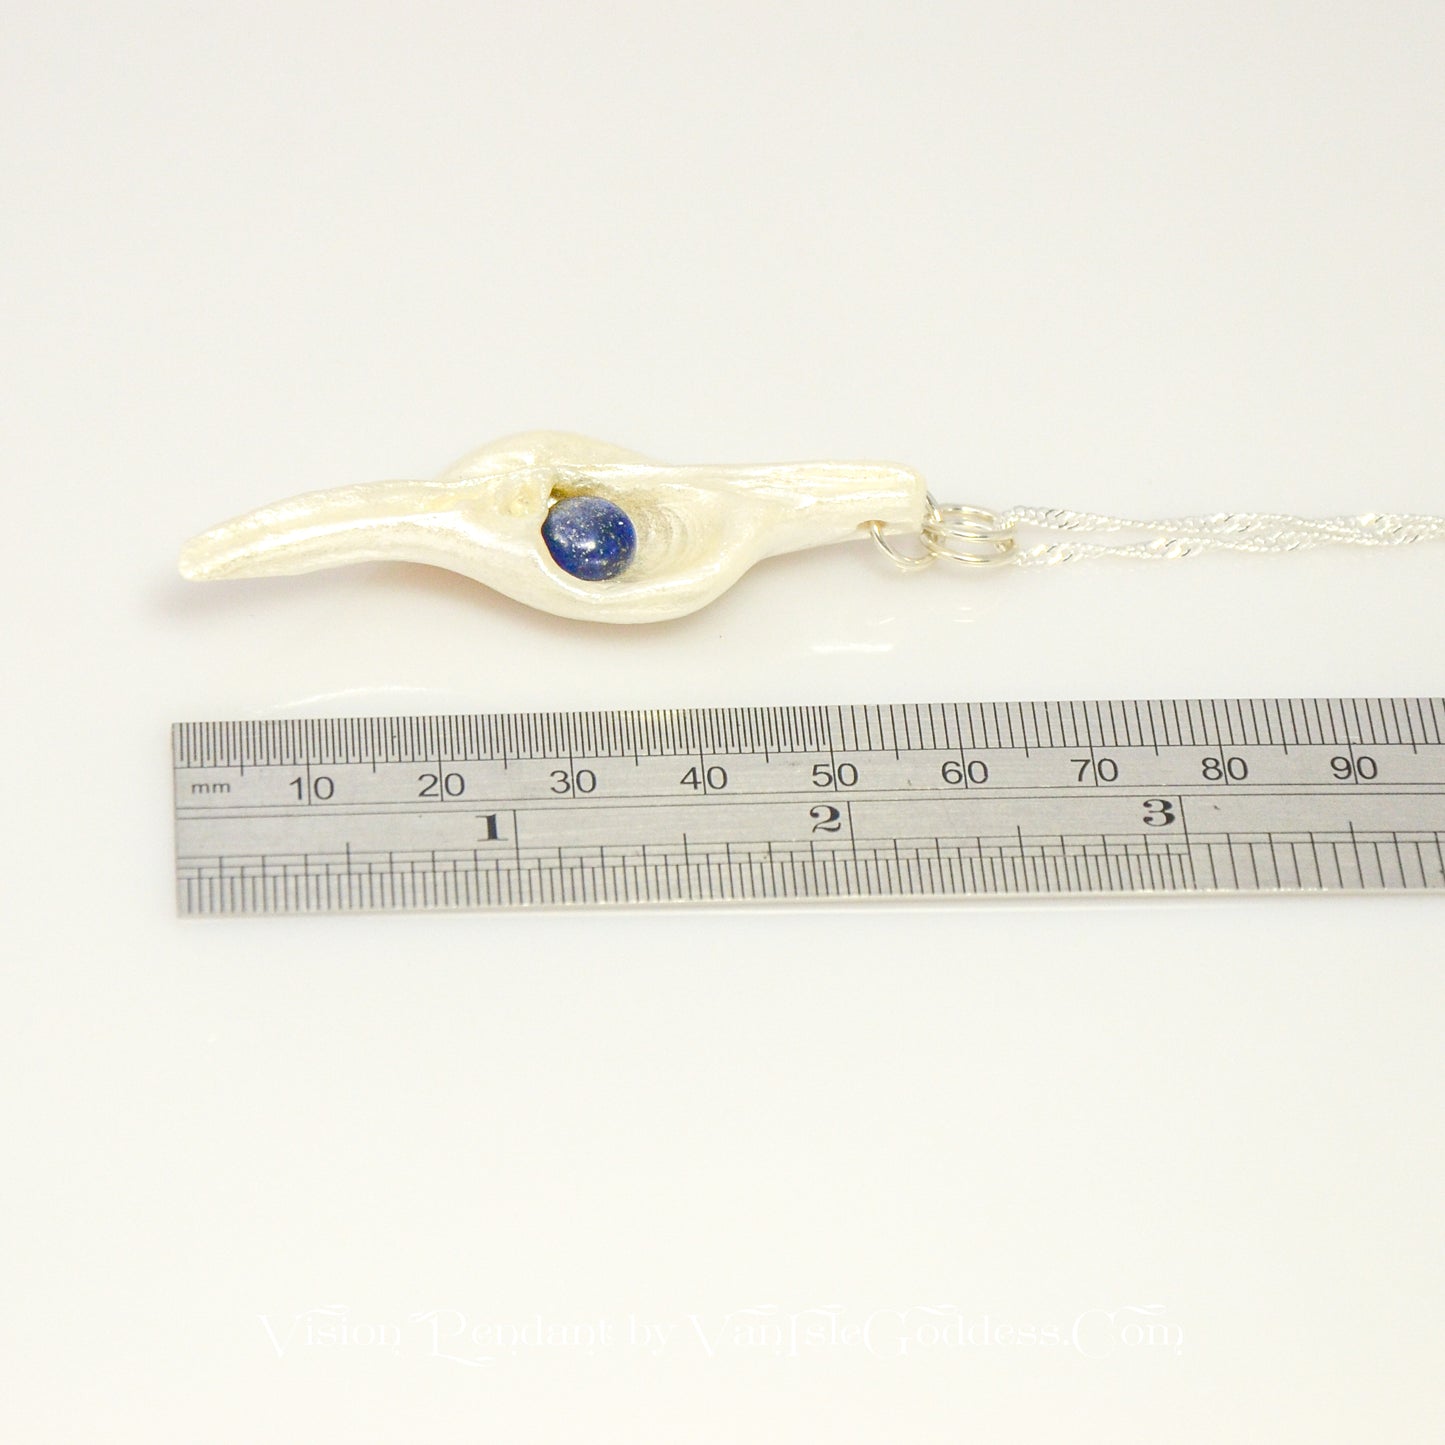 Vision is a natural seashell pendant with a Lapis Lazuli gemstone.  The pendant lays along side a ruler so the viewer can see the length of the pendant.